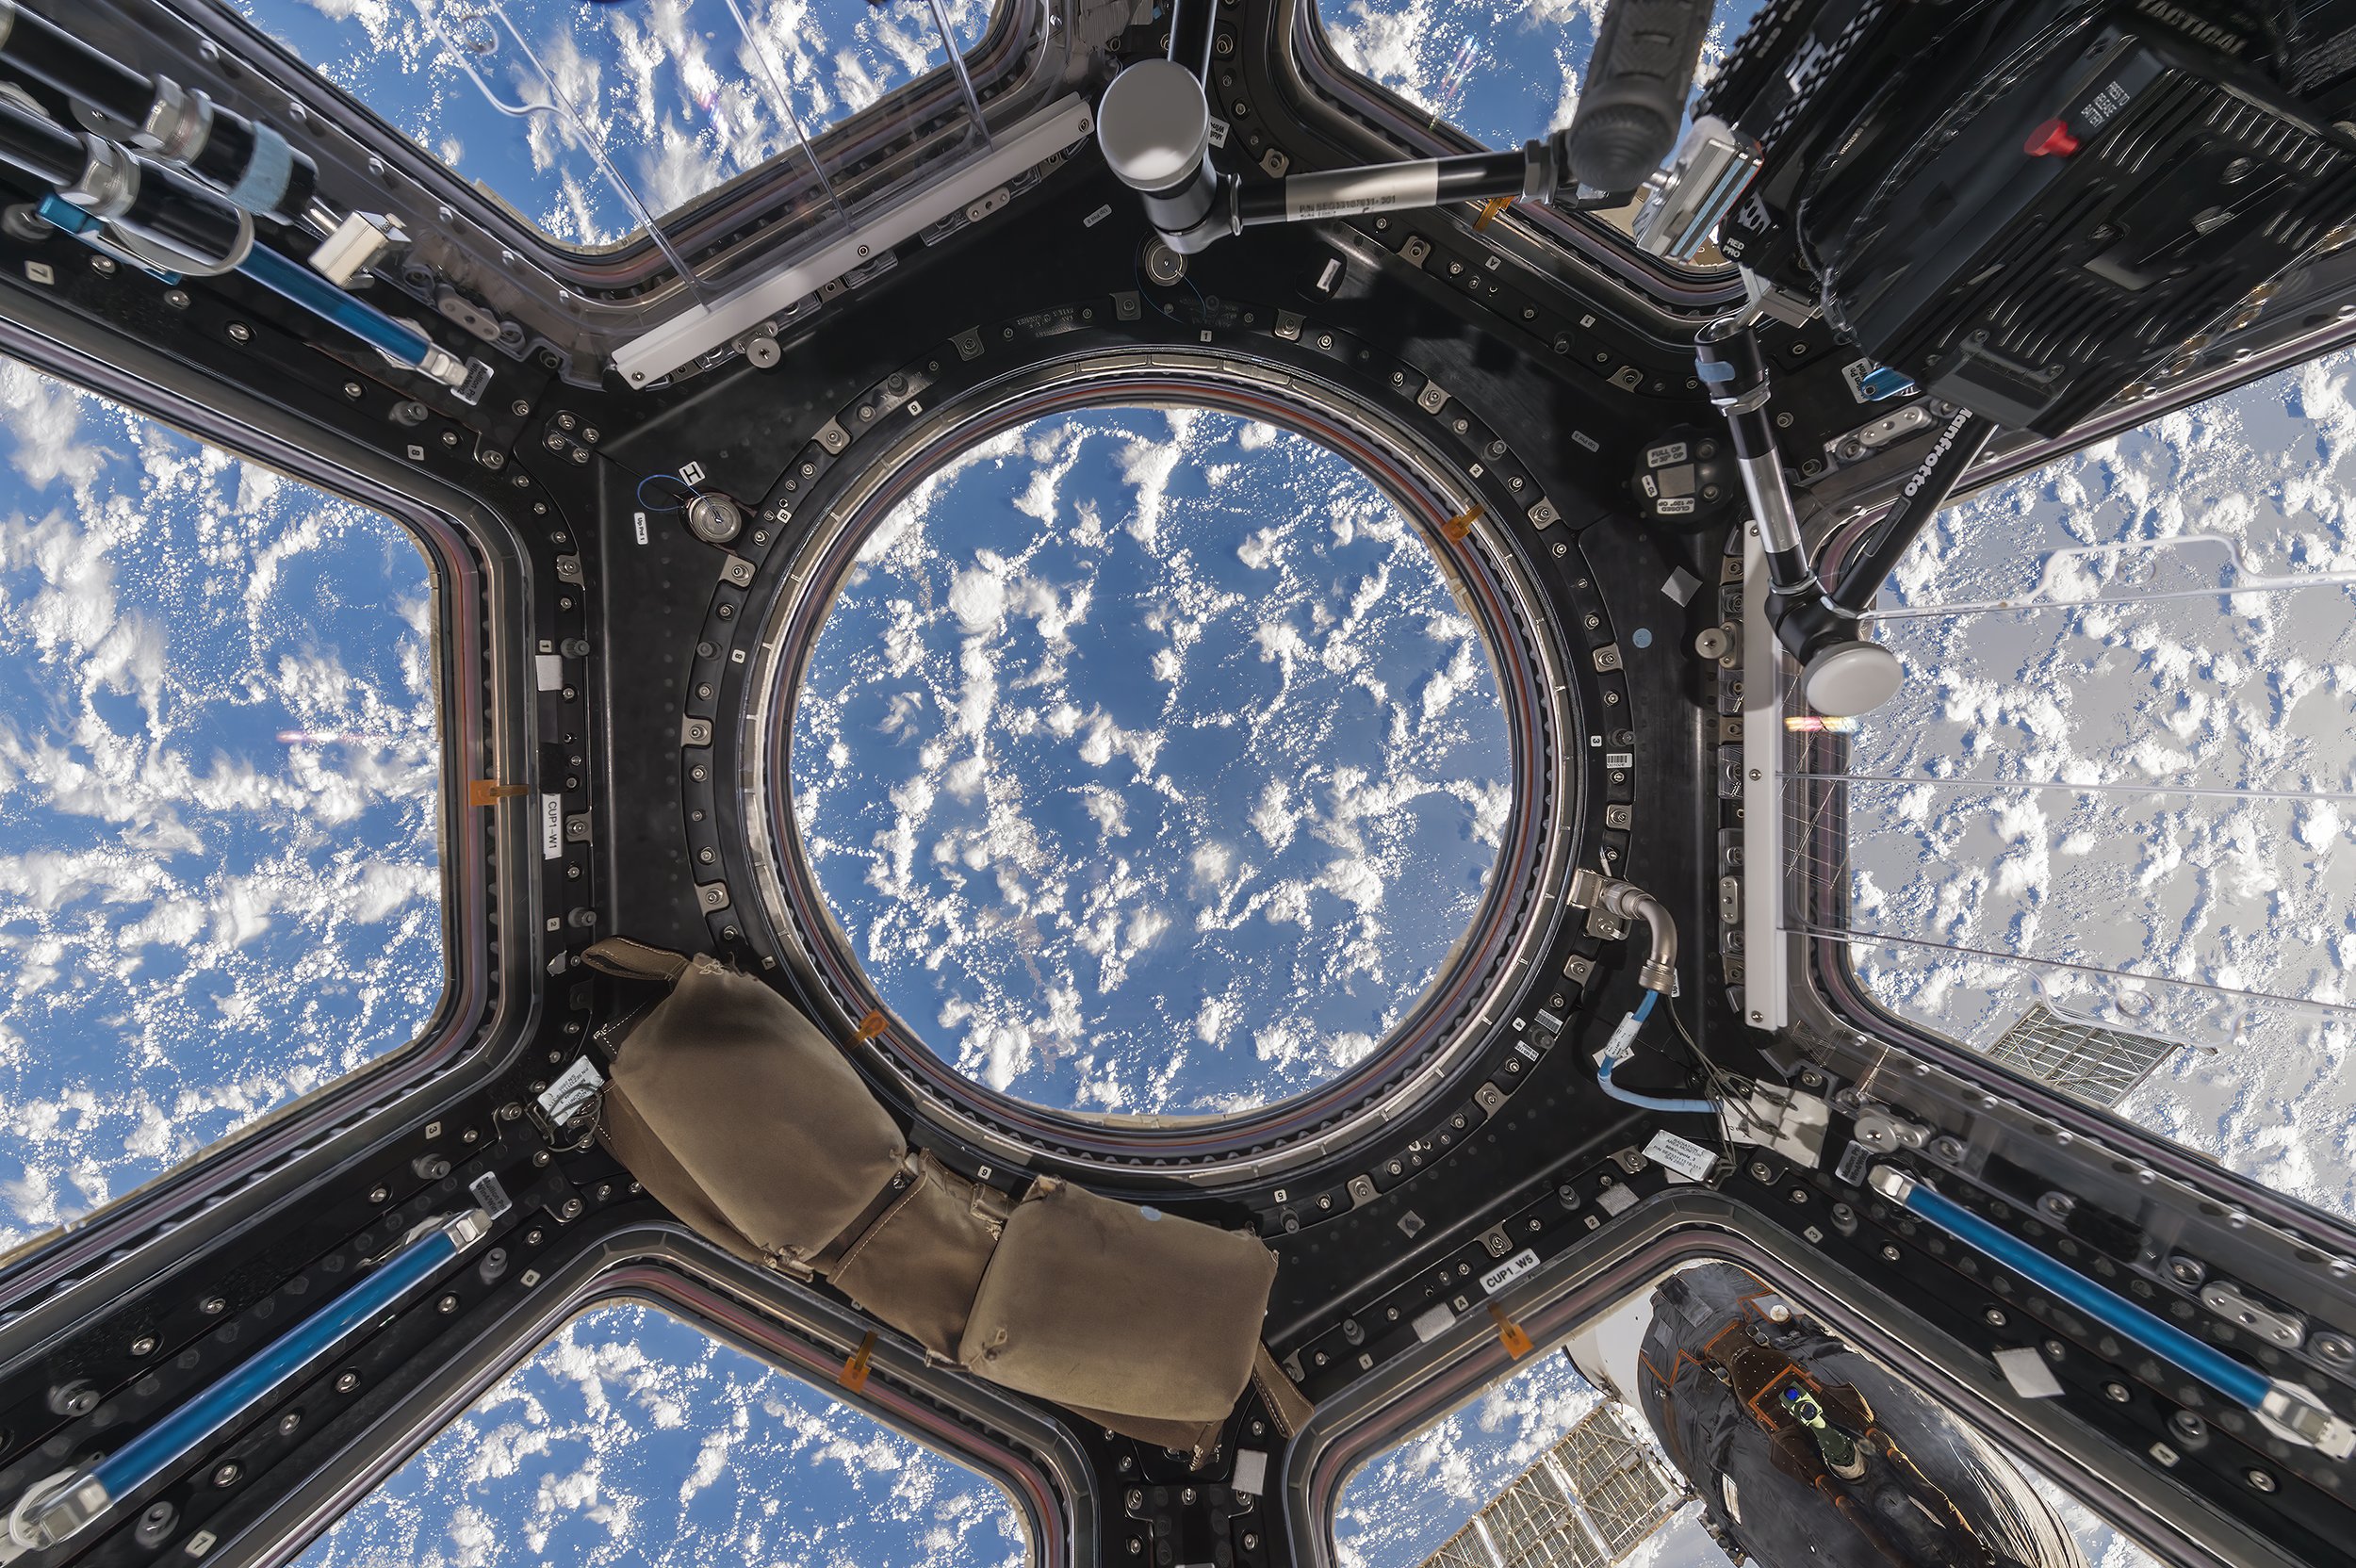  Roland Miller and Paolo Nespoli, Cupola with Clouds and Ocean, 2020. Chromogenic color print. Courtesy of the artist. 